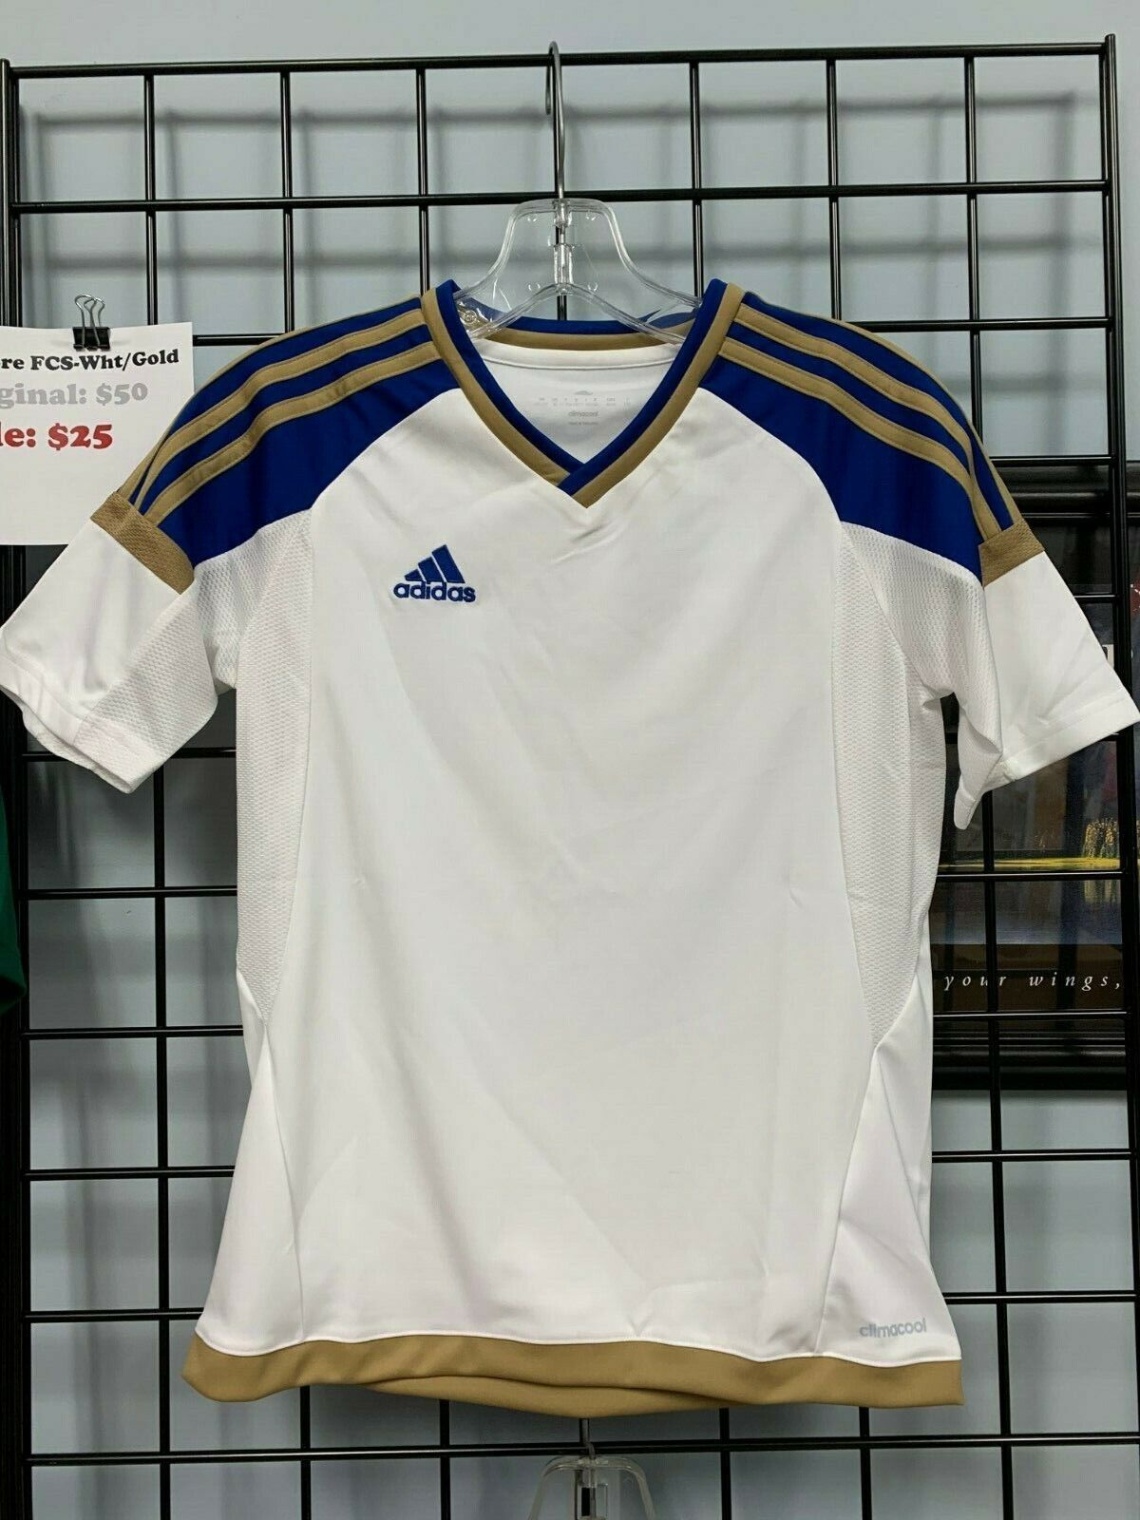 Step Up Your Game With Adidas Soccer Jersey Designs – Score Big On Style!